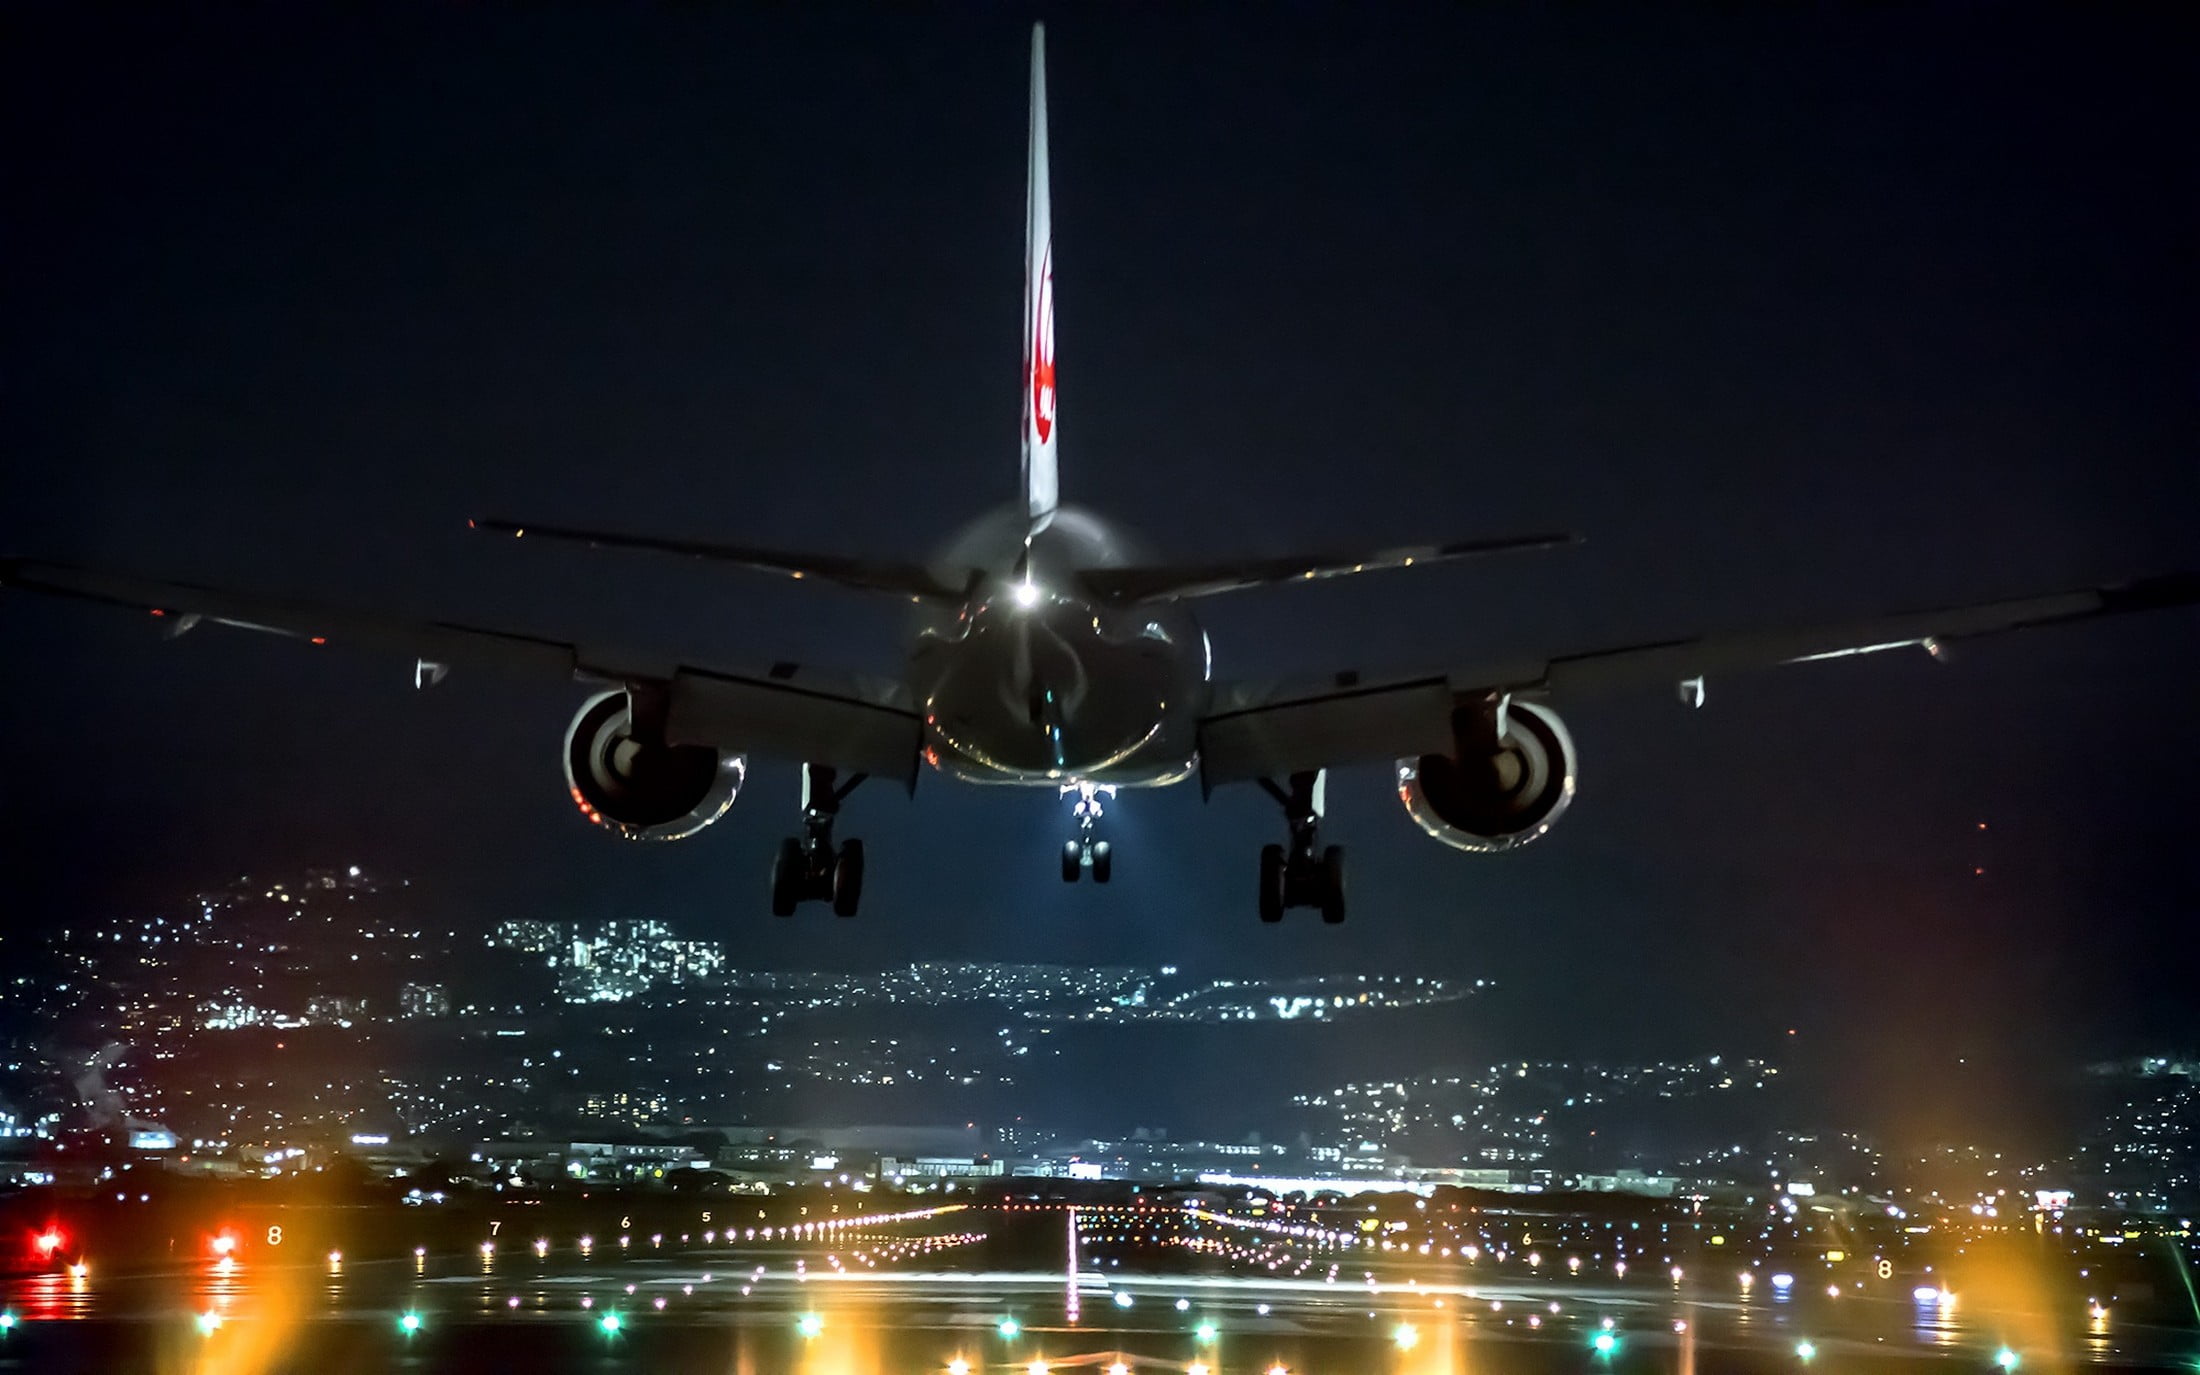 black and white airplane, passenger plane getting ready on runway to land at night time